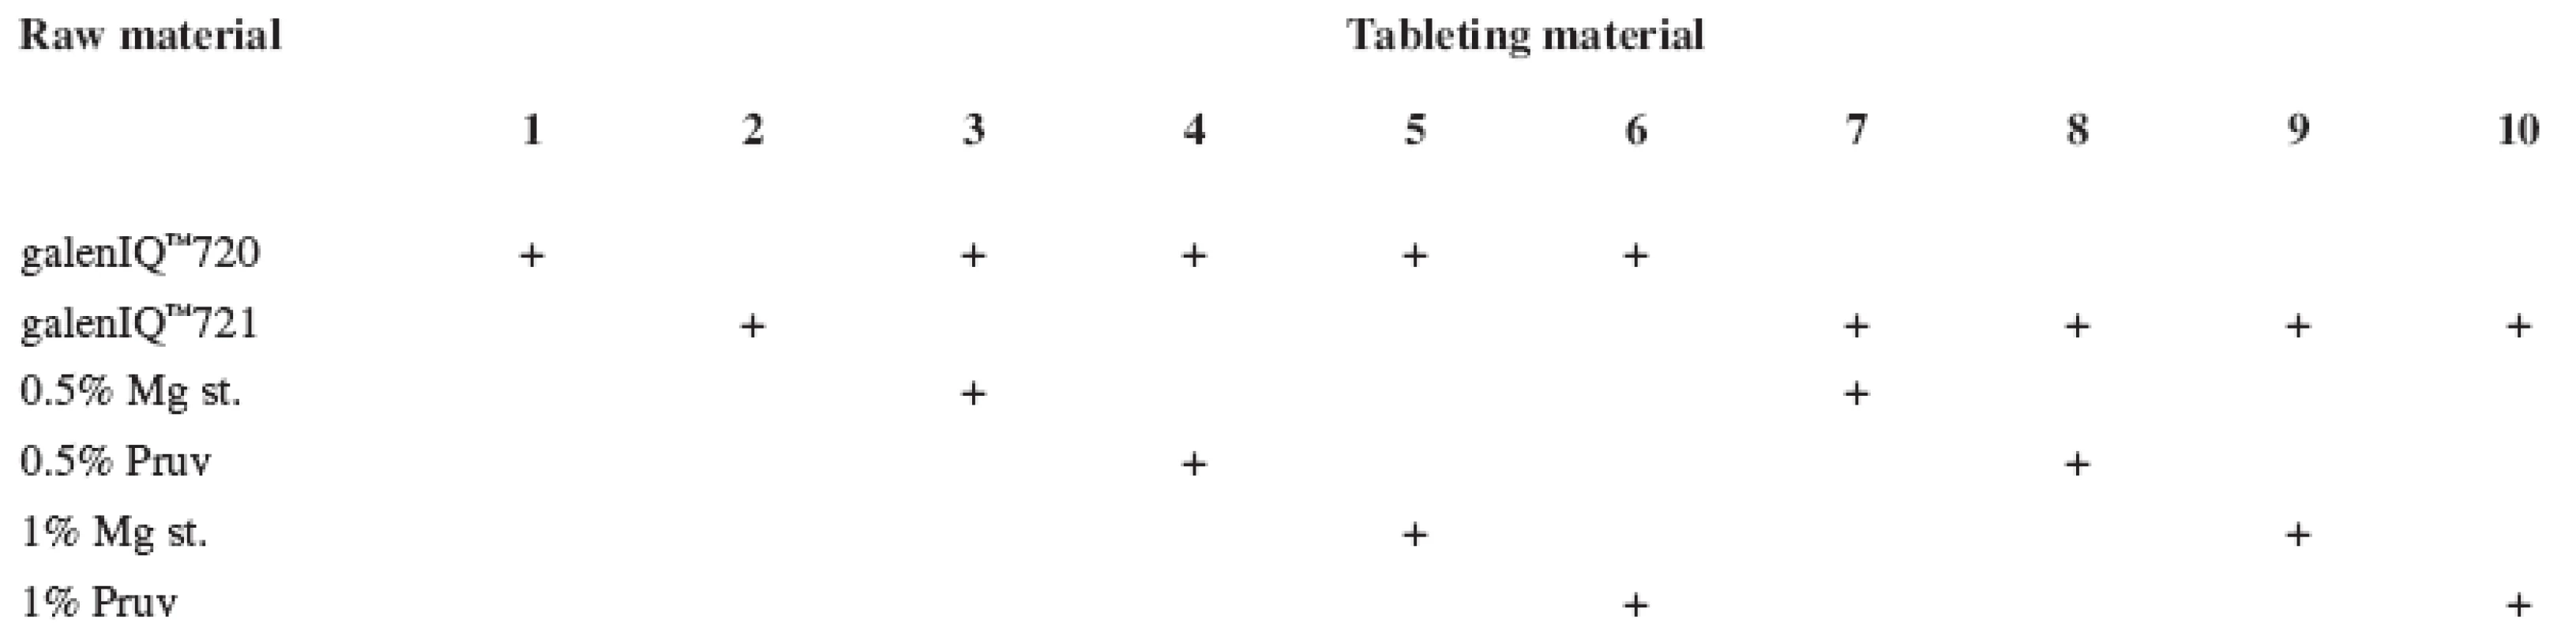 Tableting materials without active ingredients